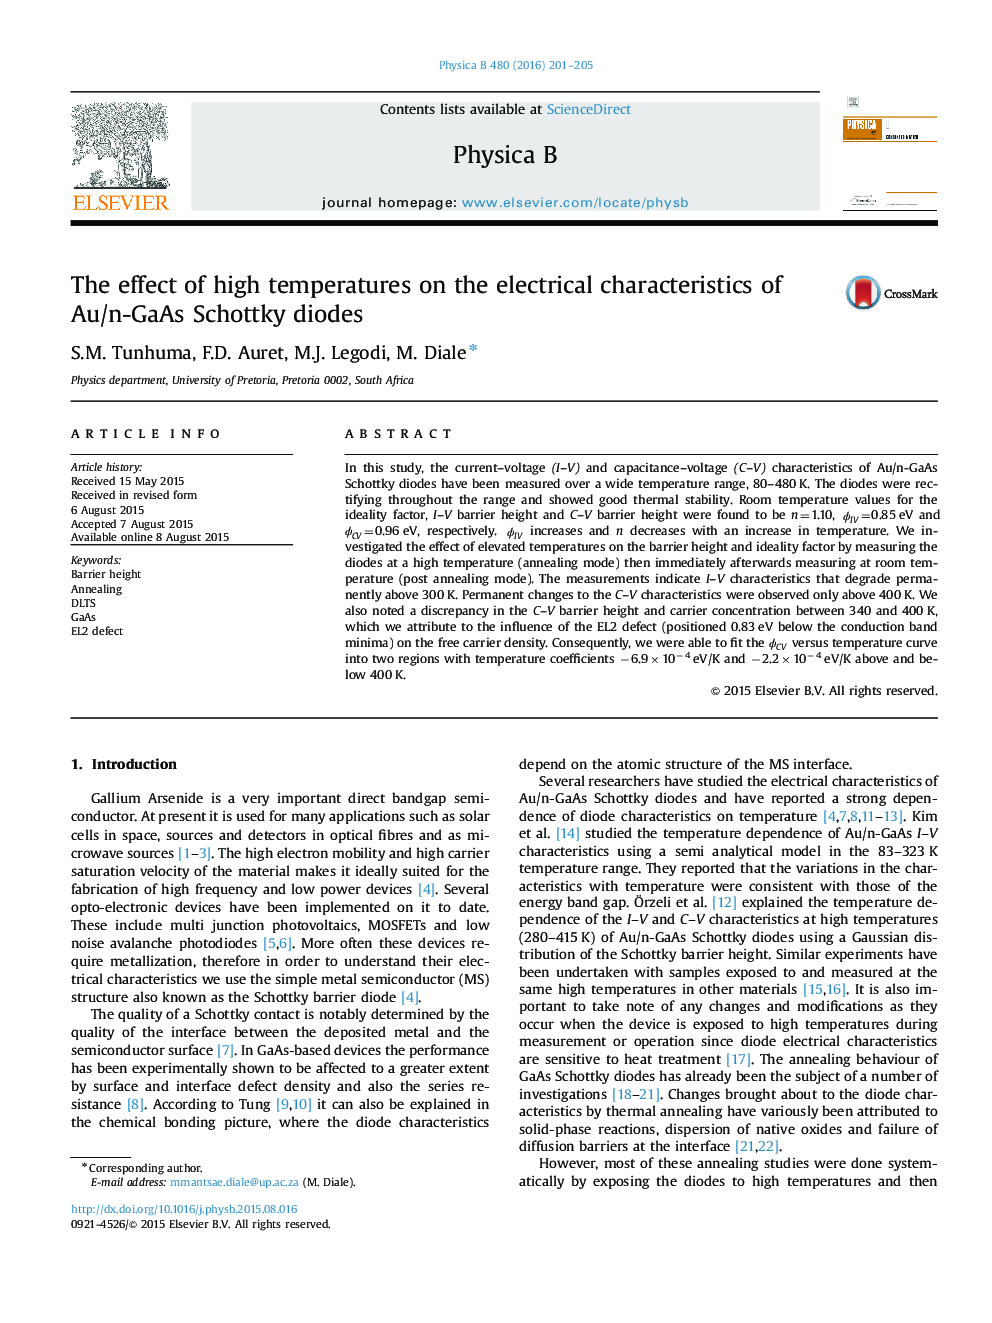 The effect of high temperatures on the electrical characteristics of Au/n-GaAs Schottky diodes